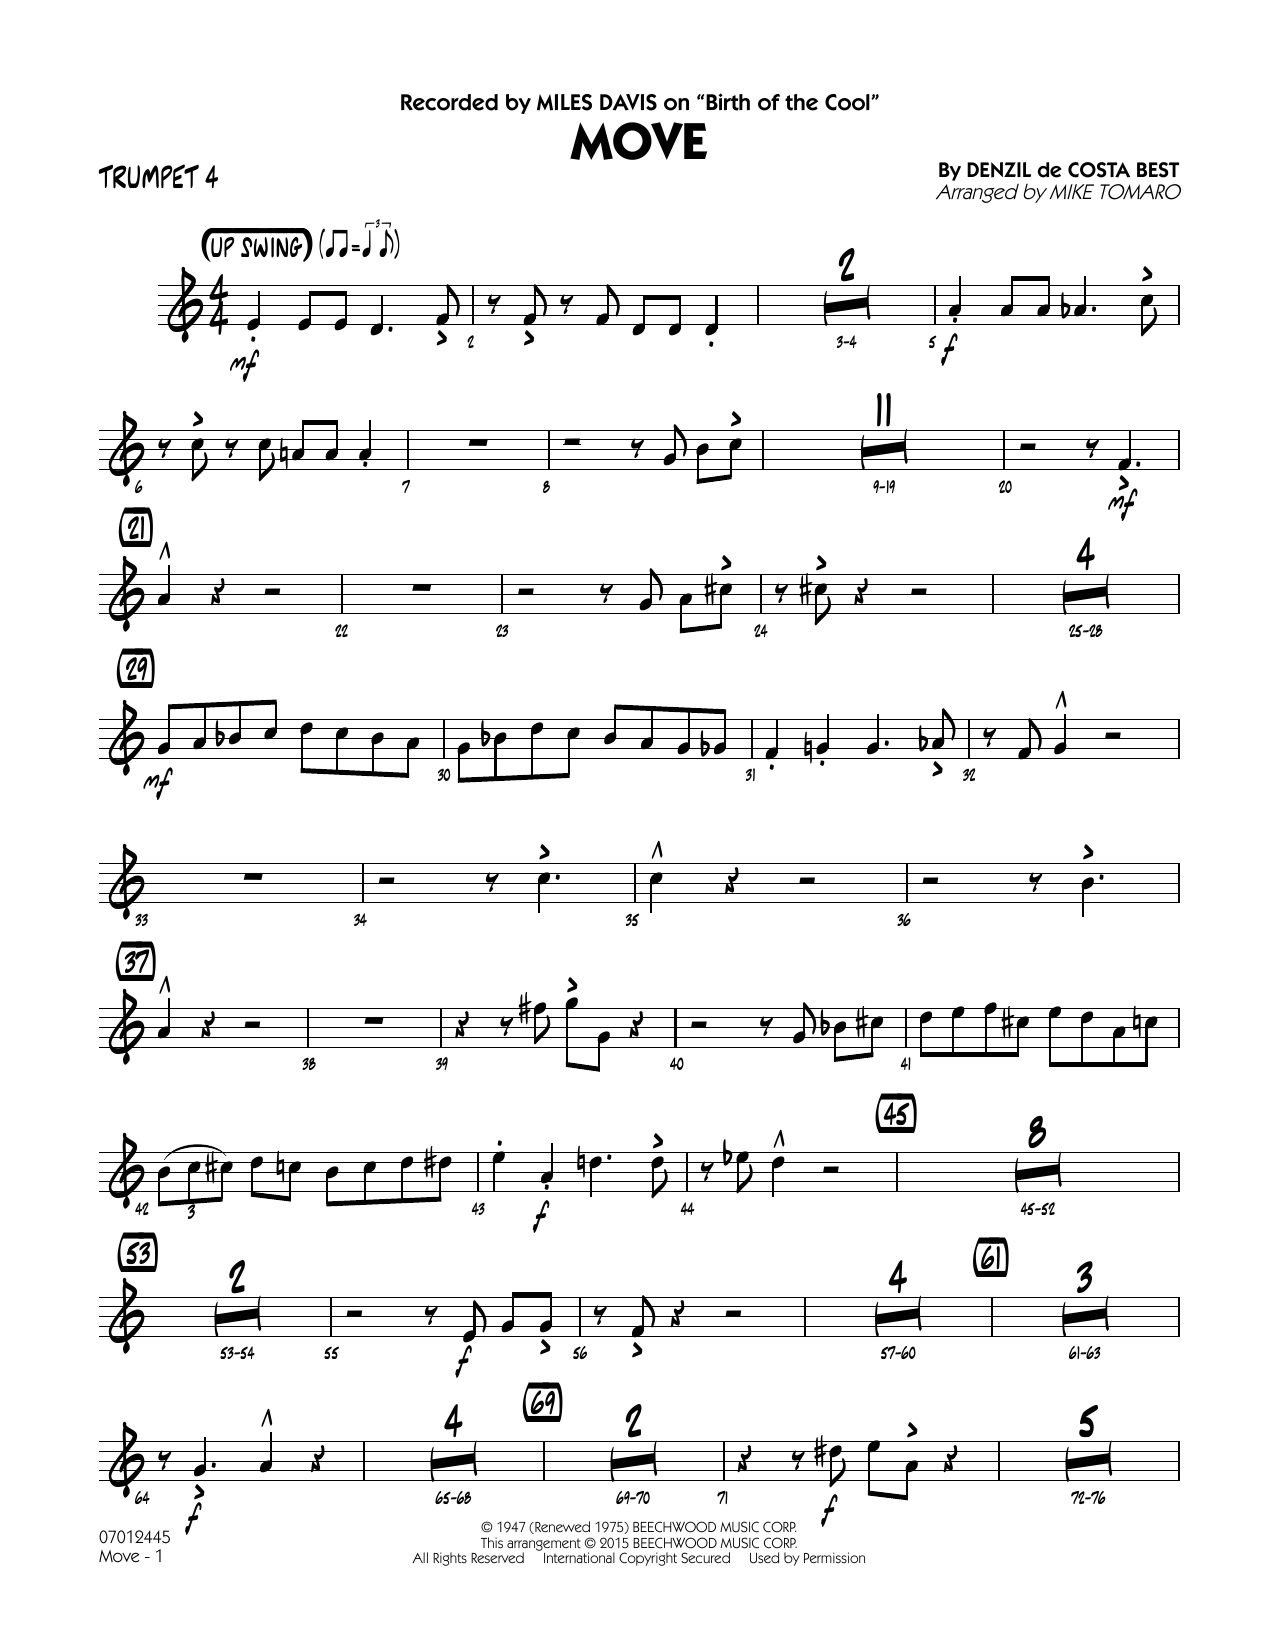 Mike Tomaro Move - Trumpet 4 sheet music notes and chords. Download Printable PDF.